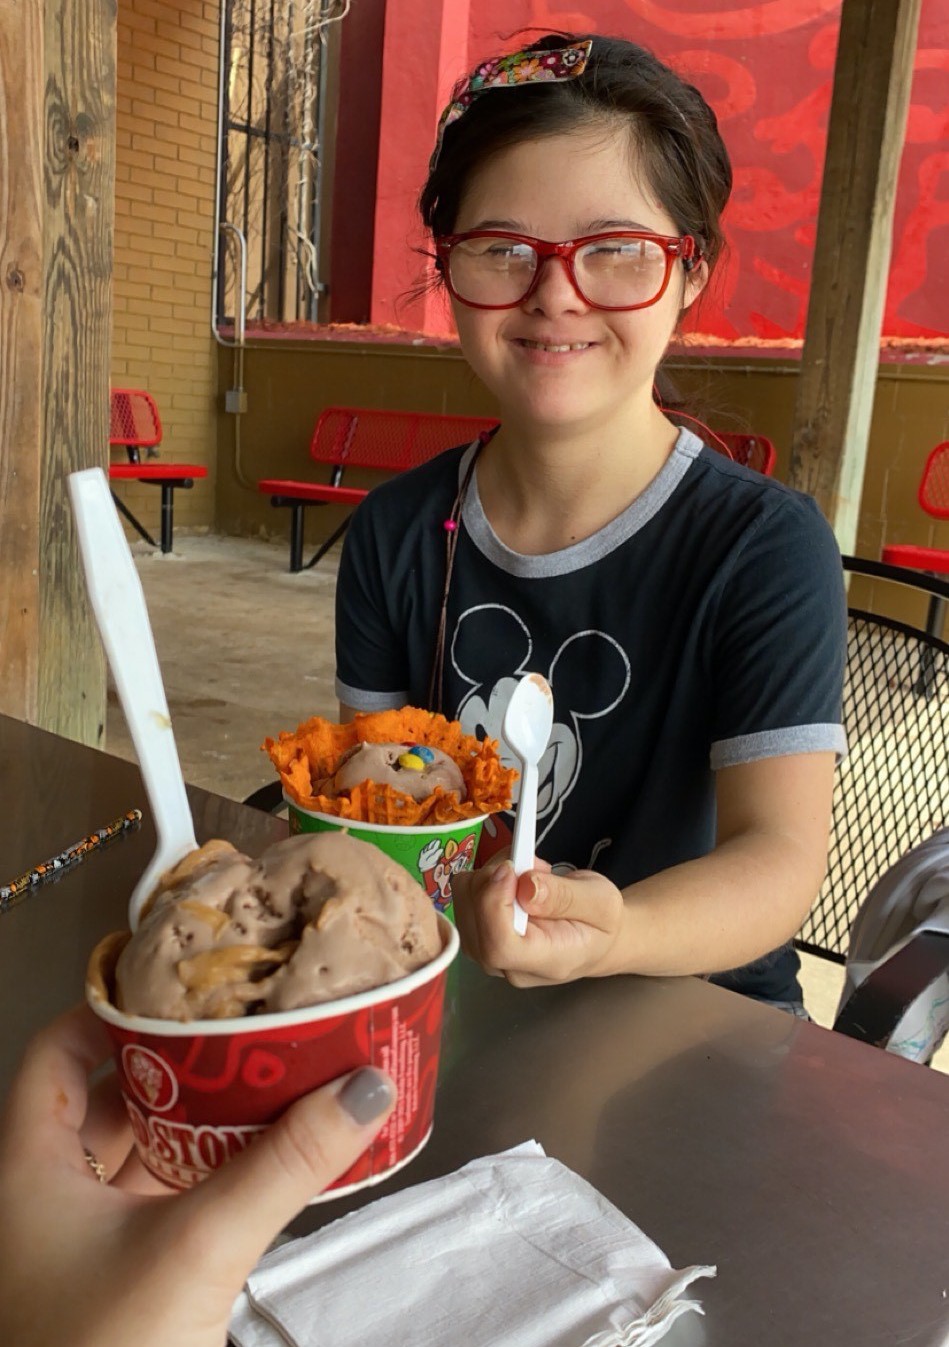 Here's a way to support persons with disabilities: eat the Better Together Creation at Cold Stone.